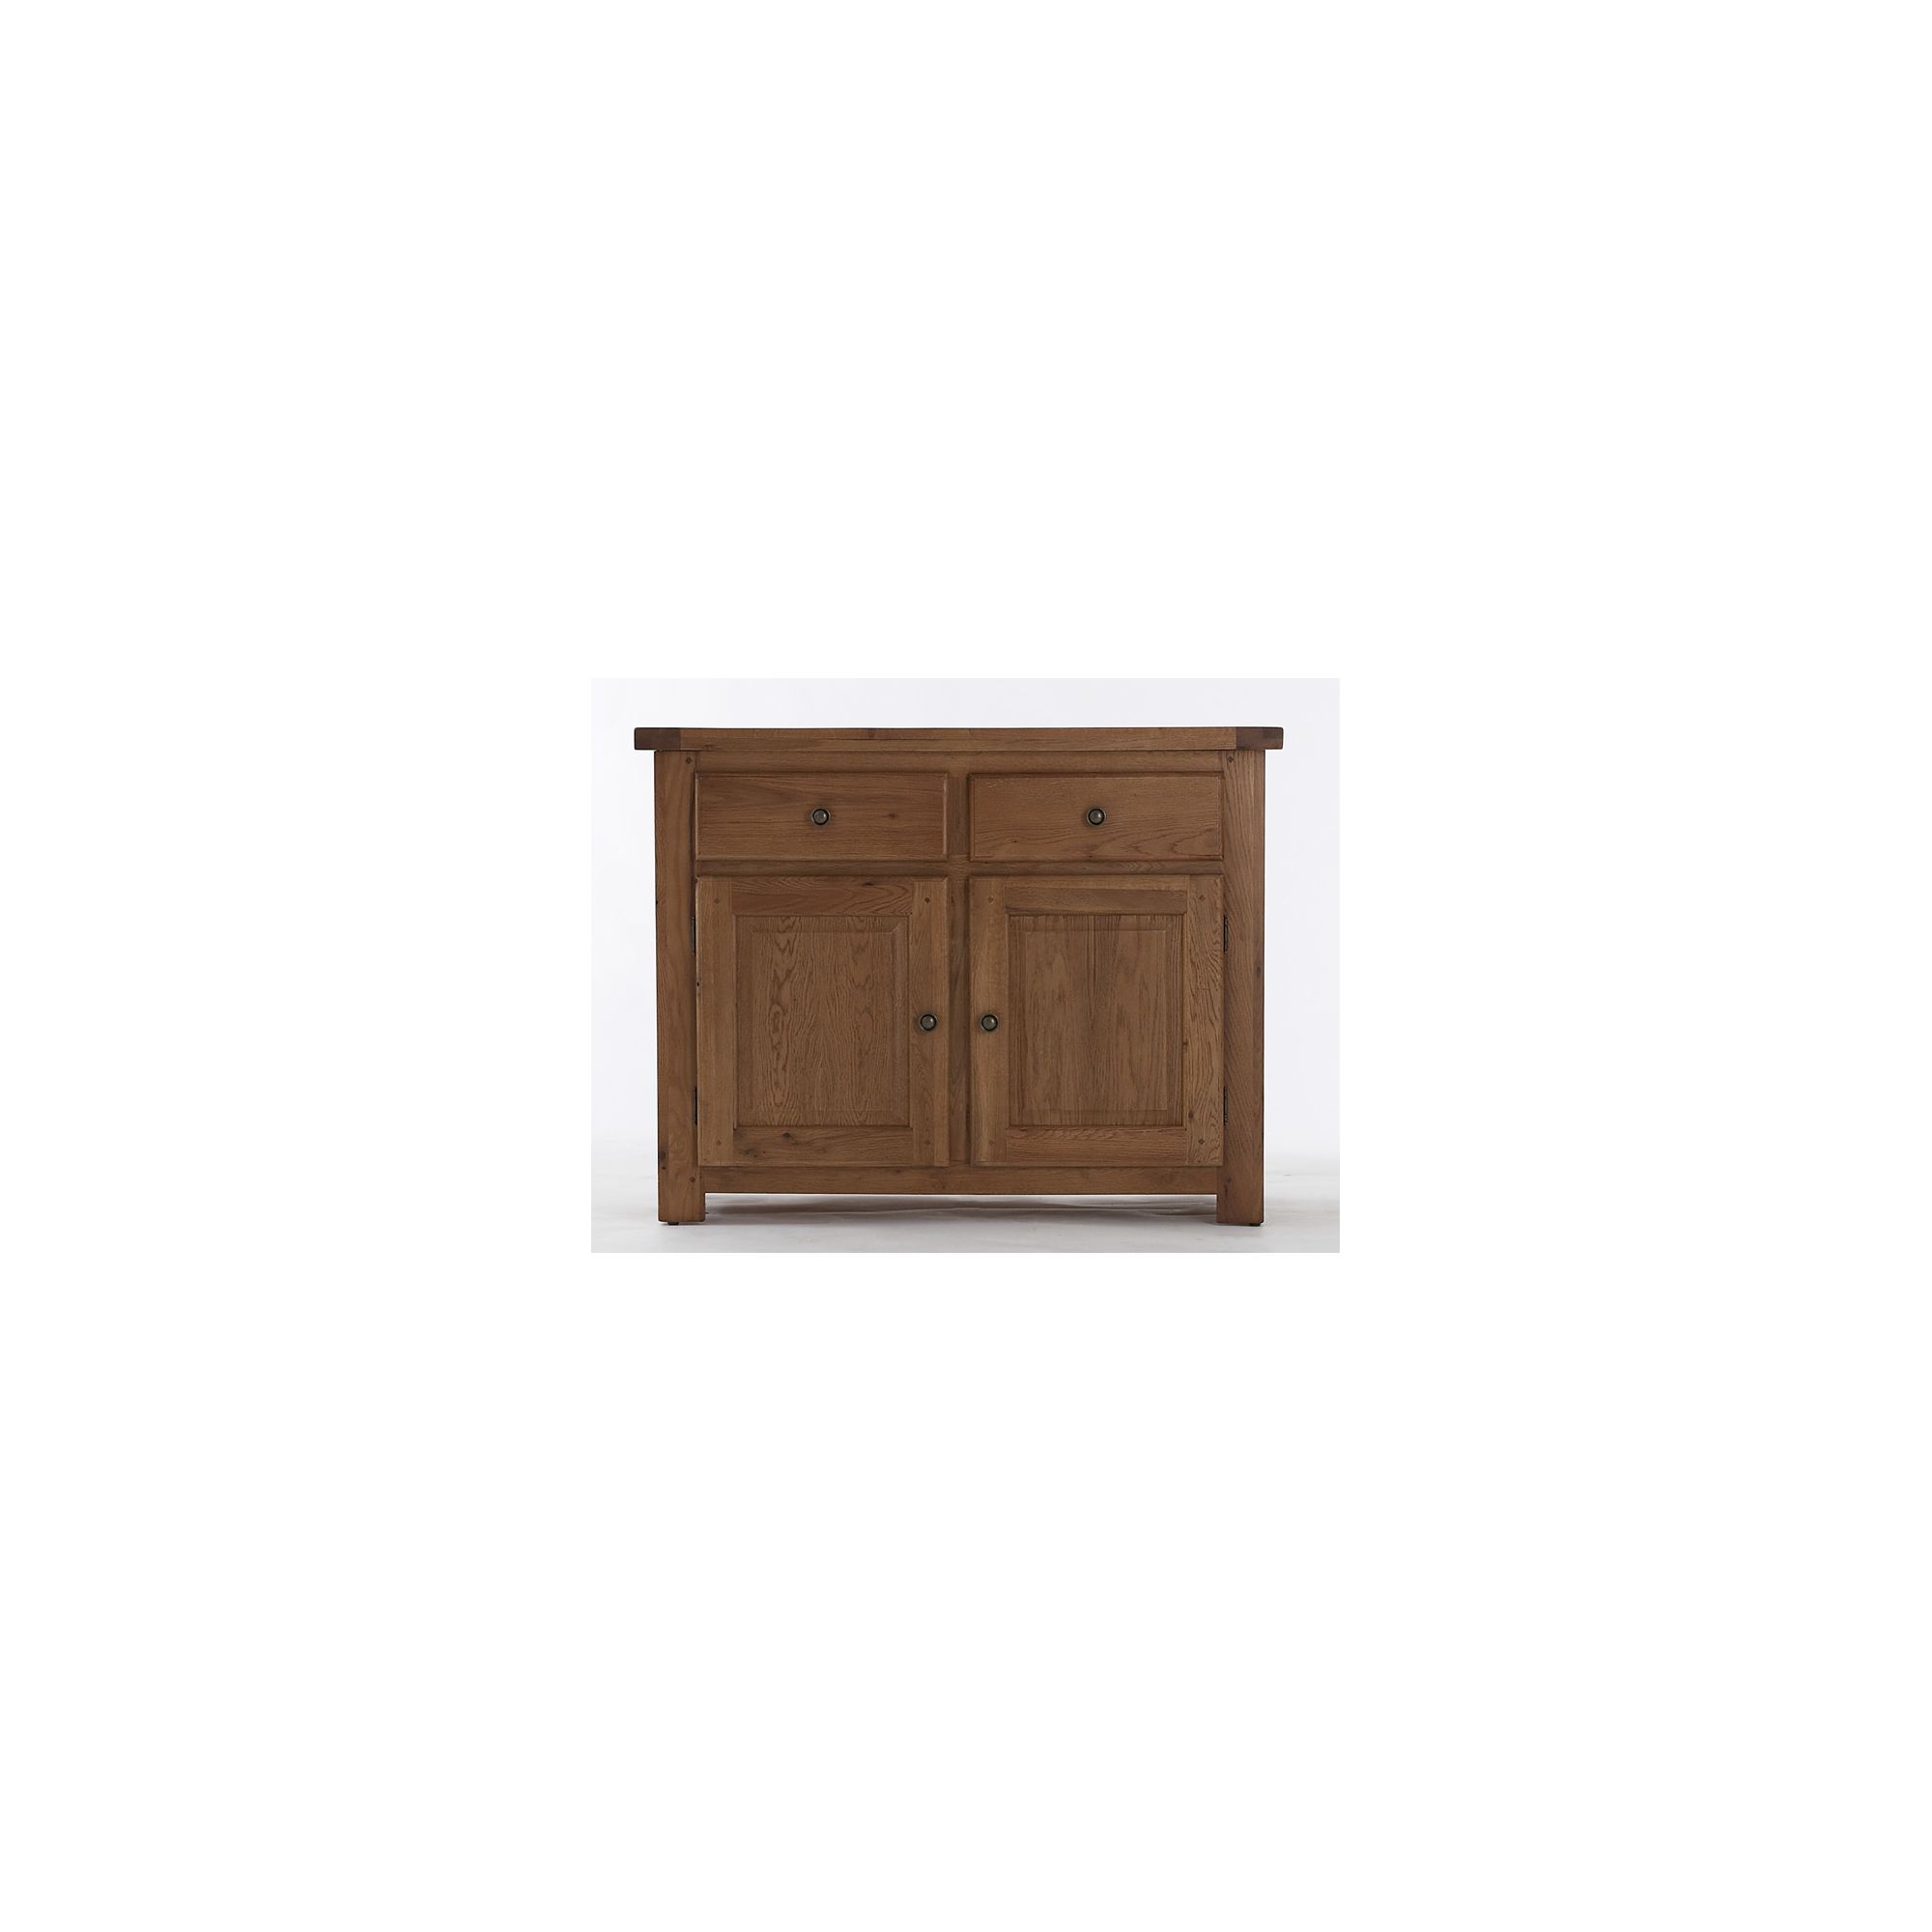 Thorndon Farmhouse 2 Door Sideboard in Old Oak at Tescos Direct